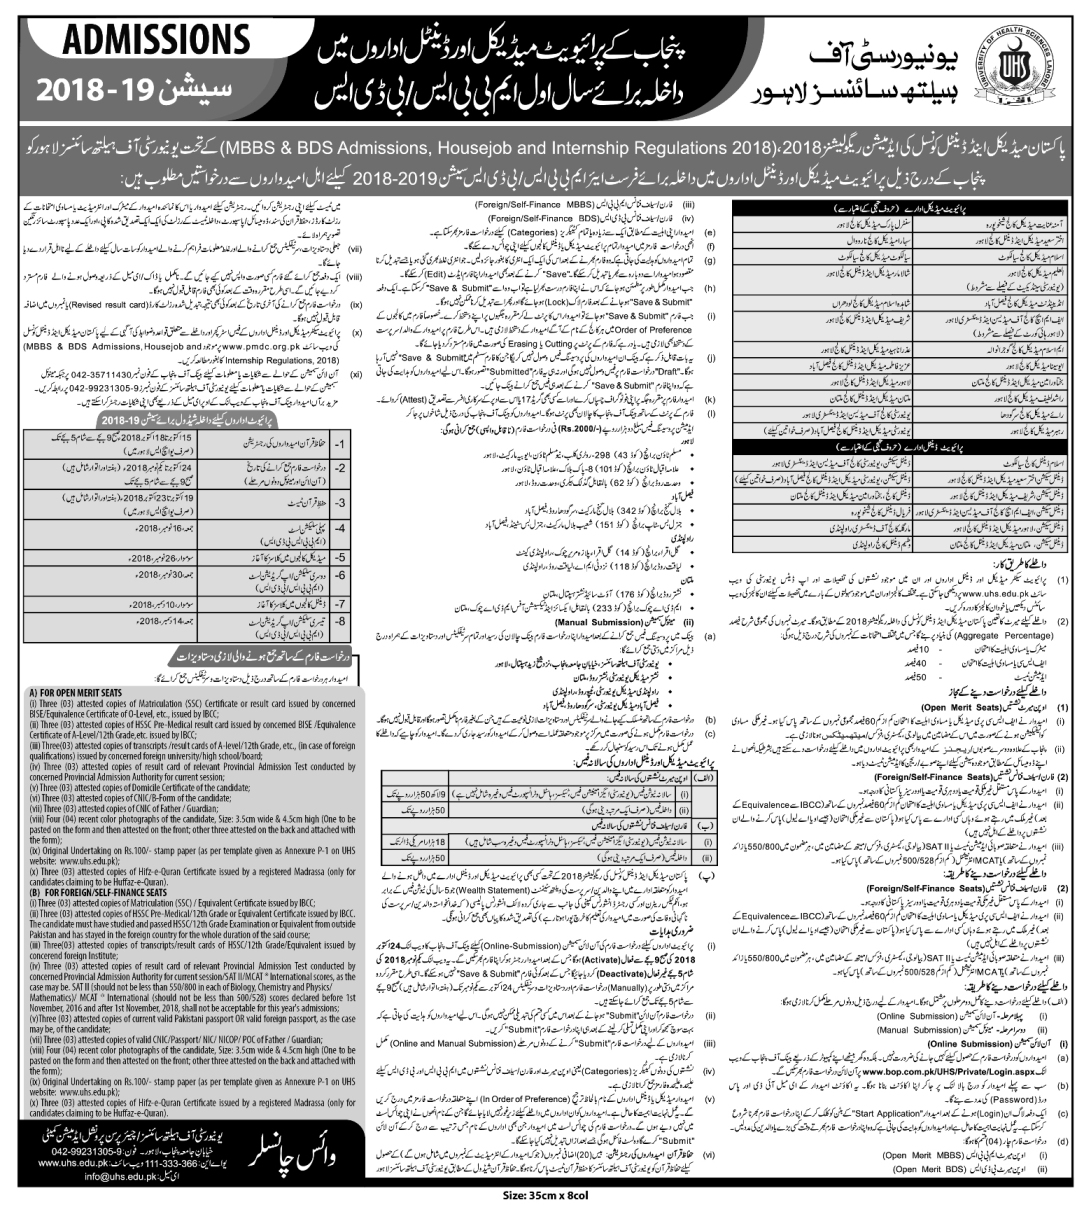 UHS admission for Private Medical and Dental Colleges 2018